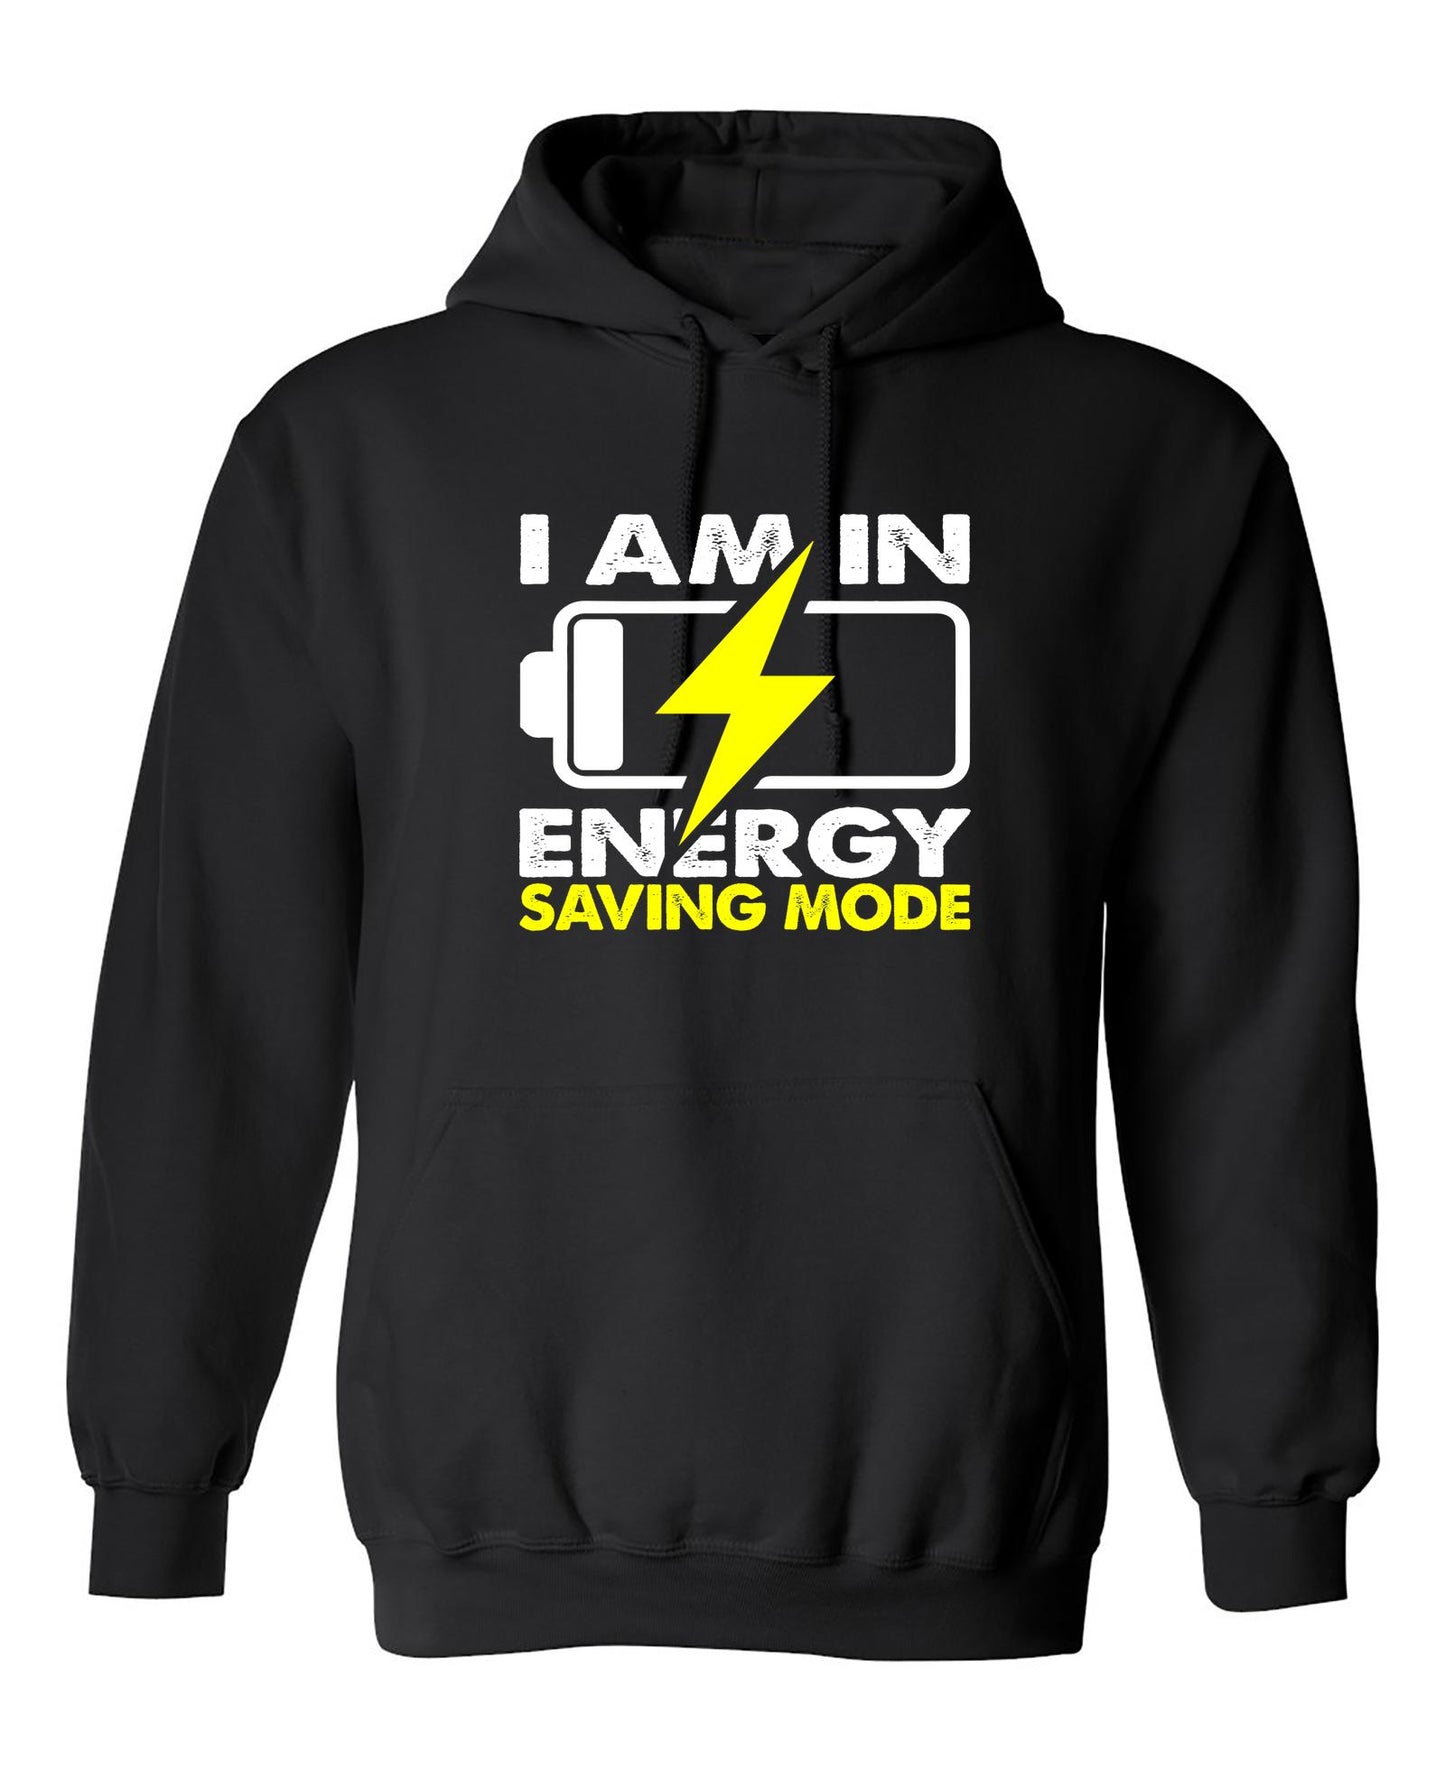 Funny T-Shirts design "I am in Energy Saving Mode"